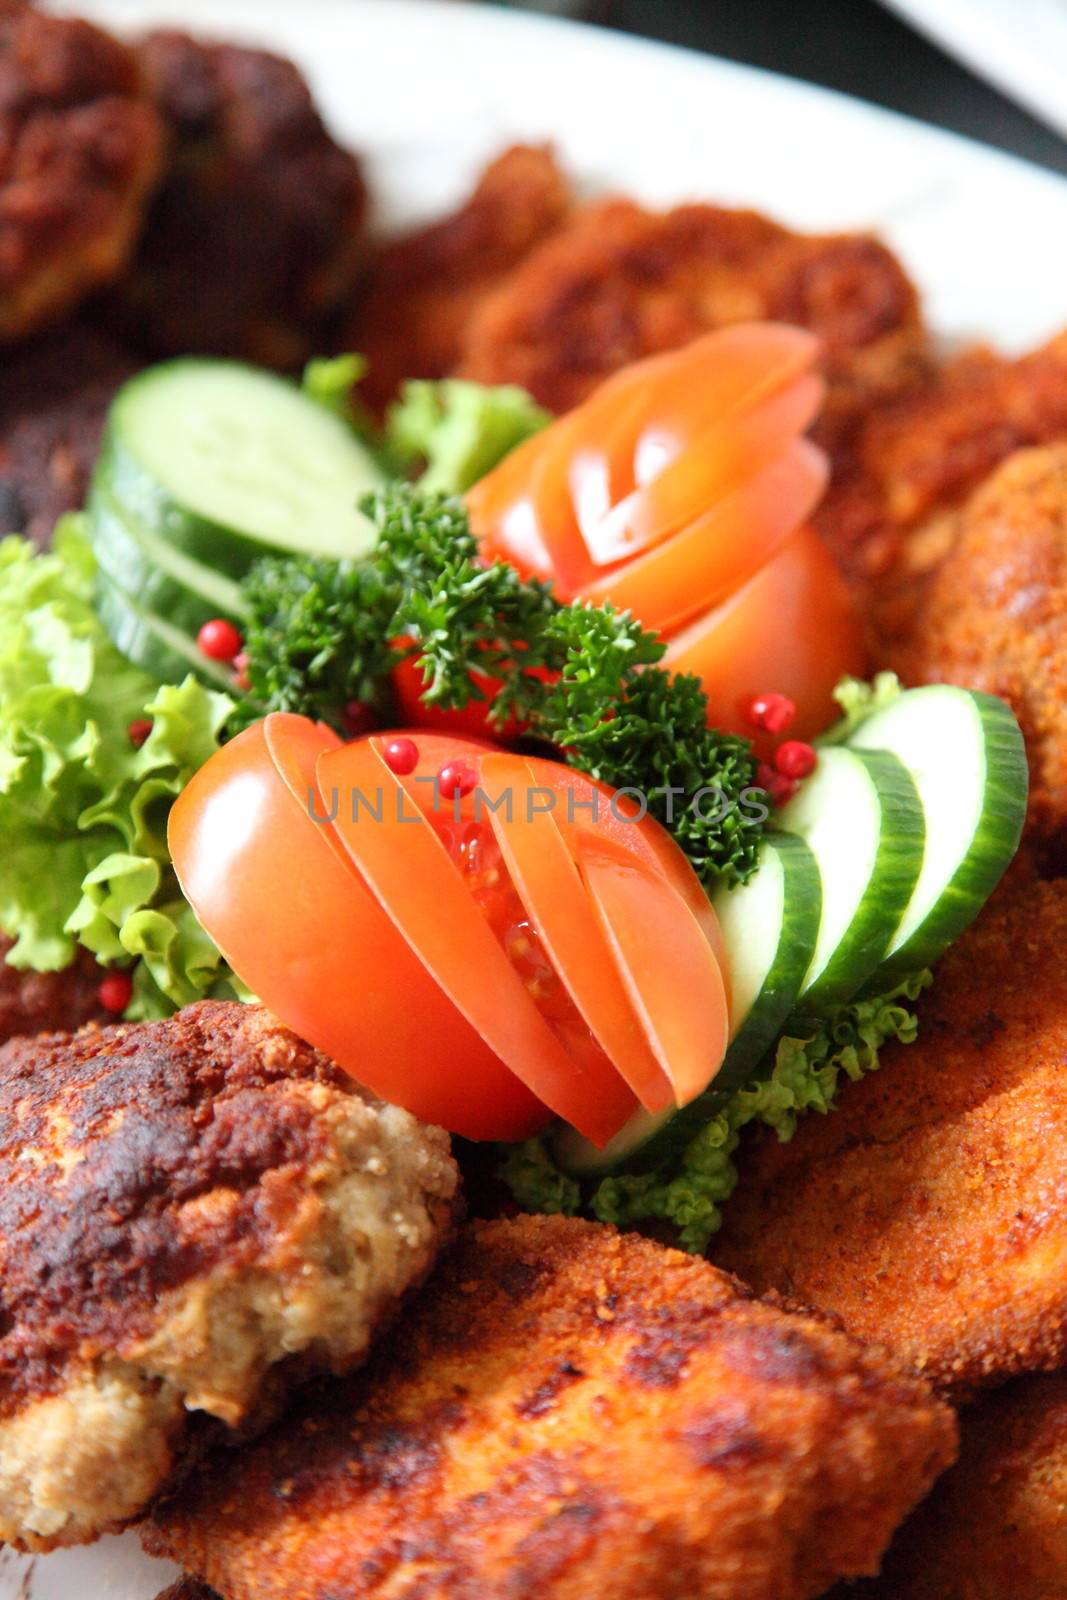 Crumbed fried meat and fish on a buffet table at a catered event with fresh salad ingredients as a garnish